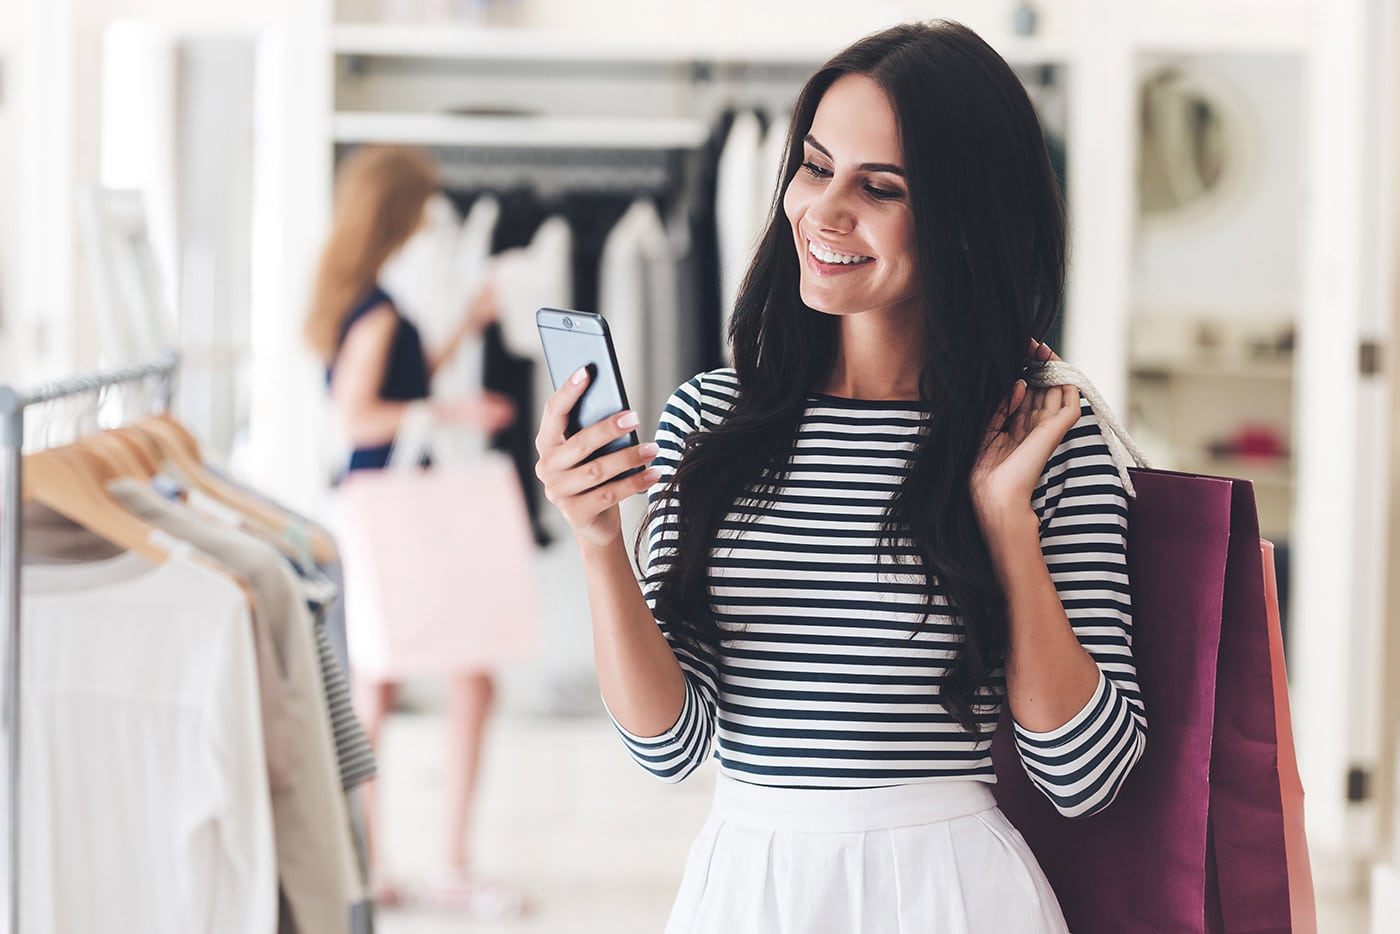 Discover the 3 benefits of mobile marketing in retail